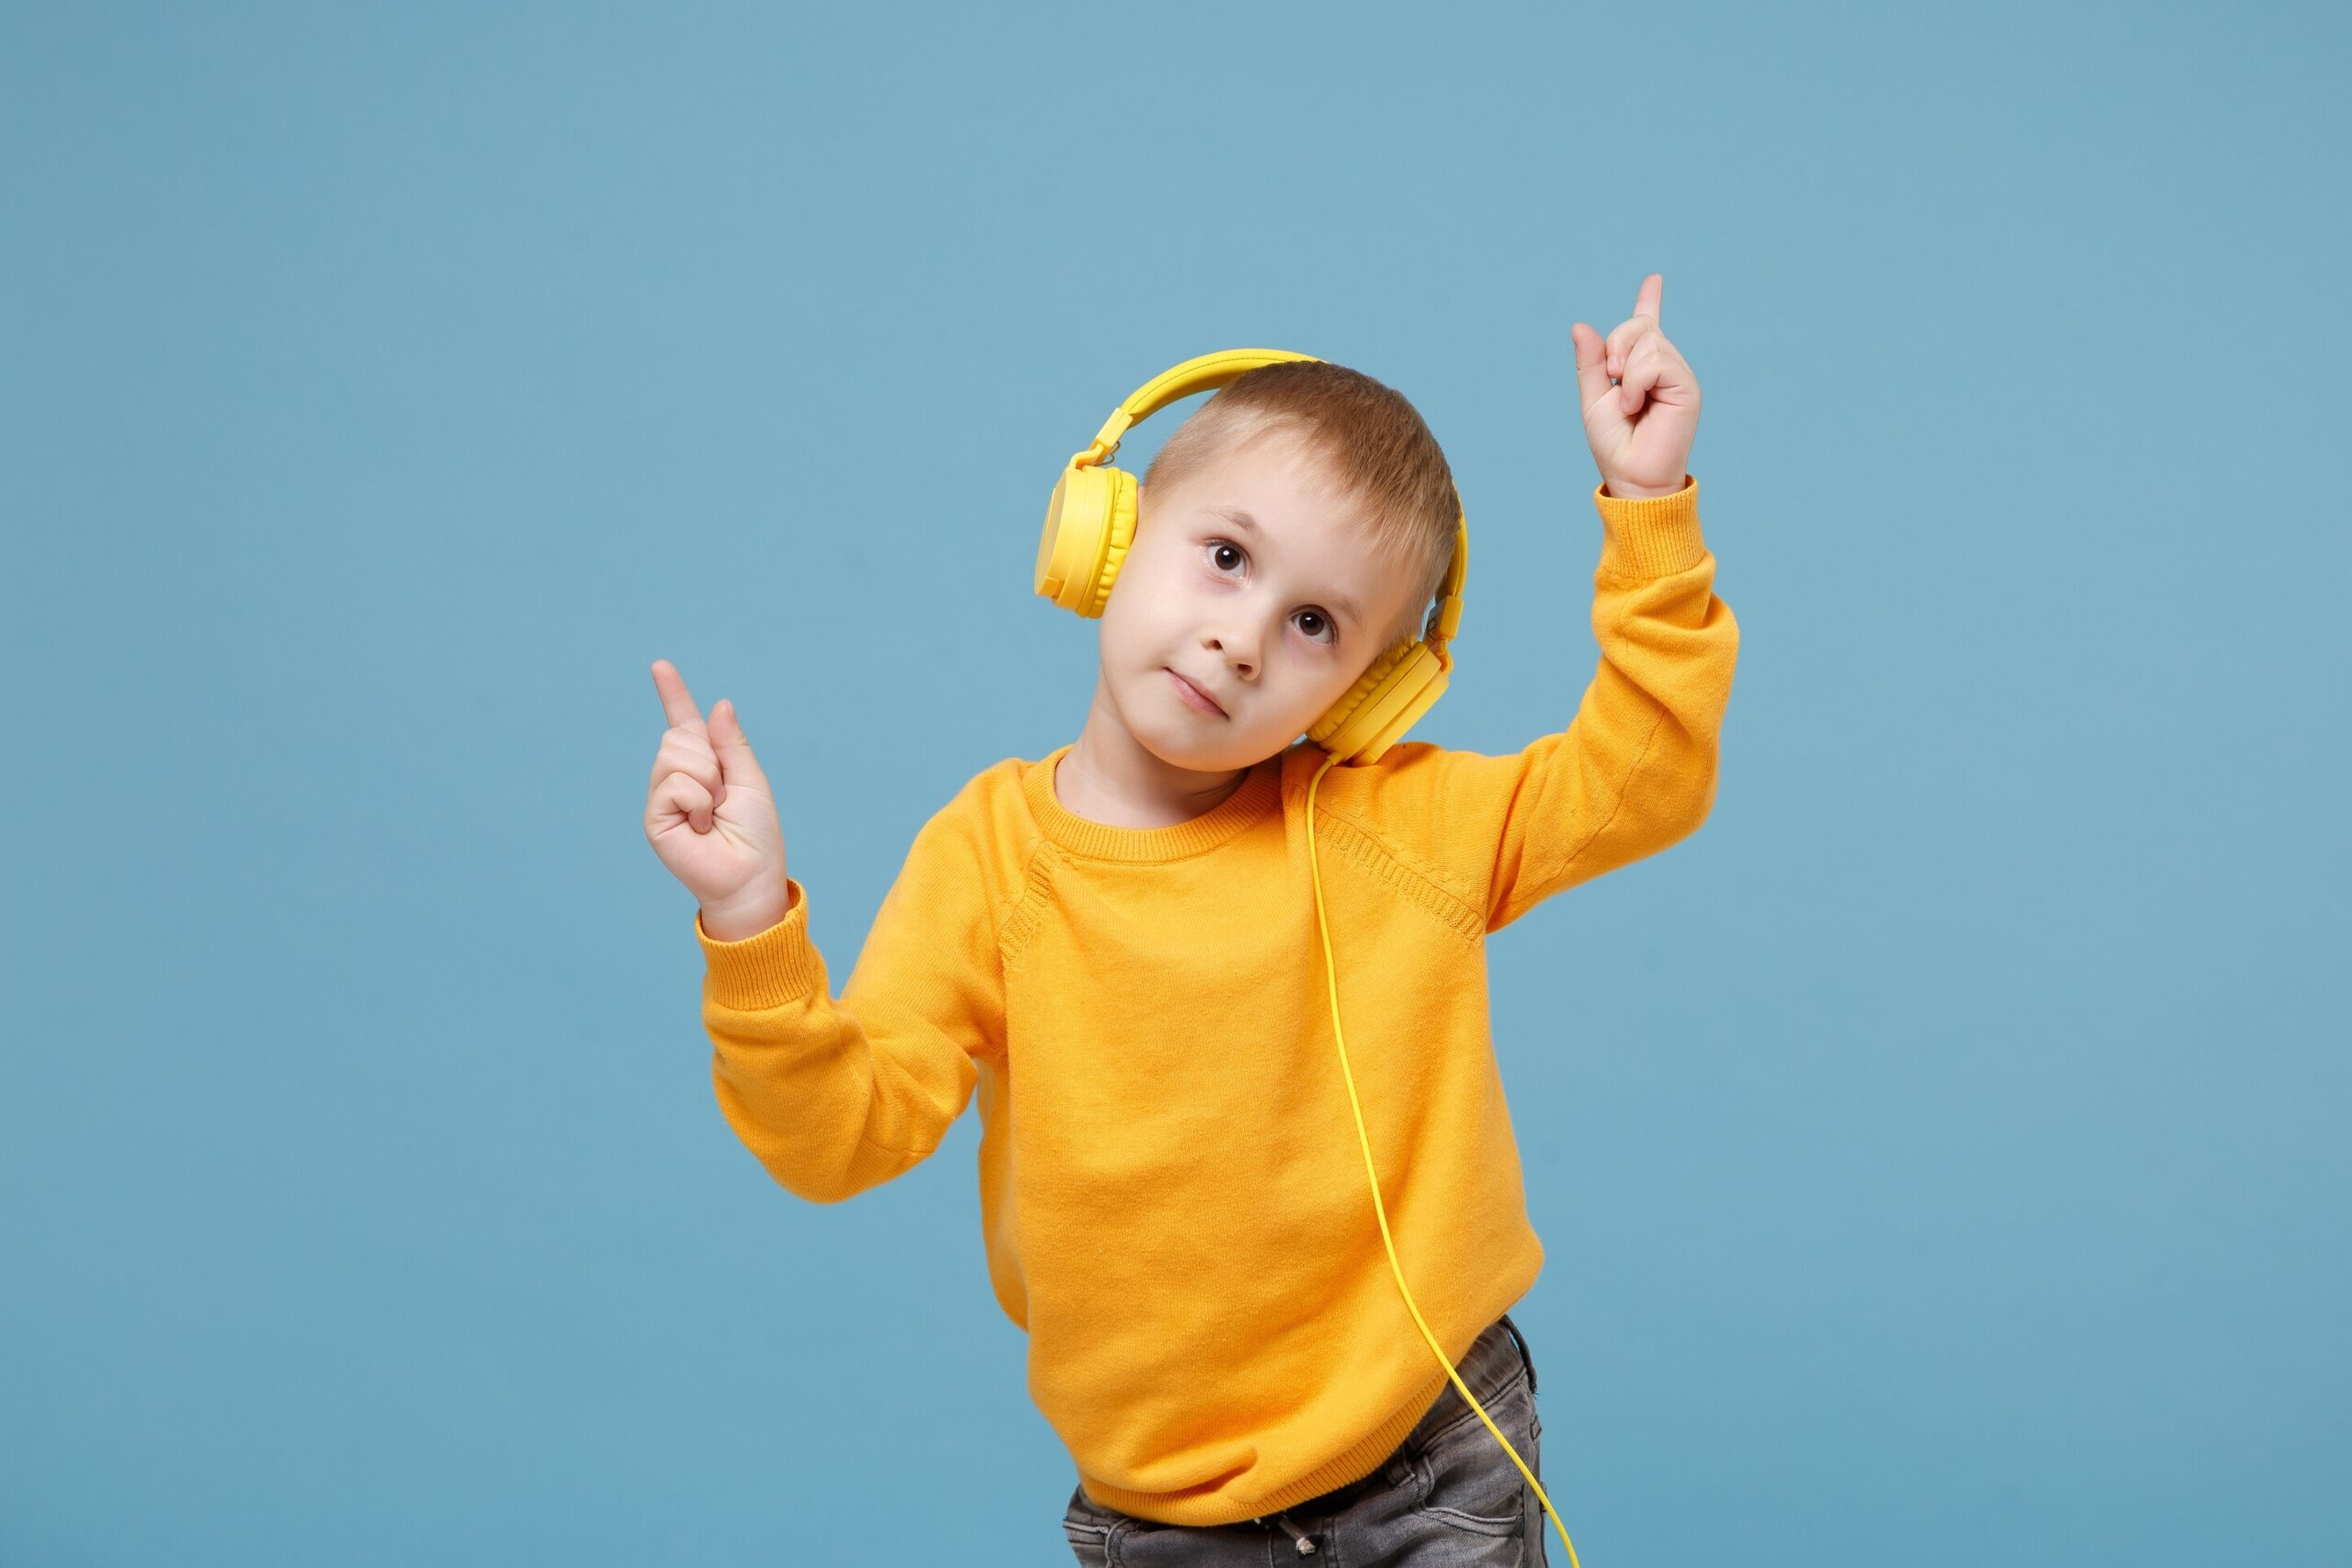 Educational, funny and inspiring, discover four podcasts to listen to with your kids this summer